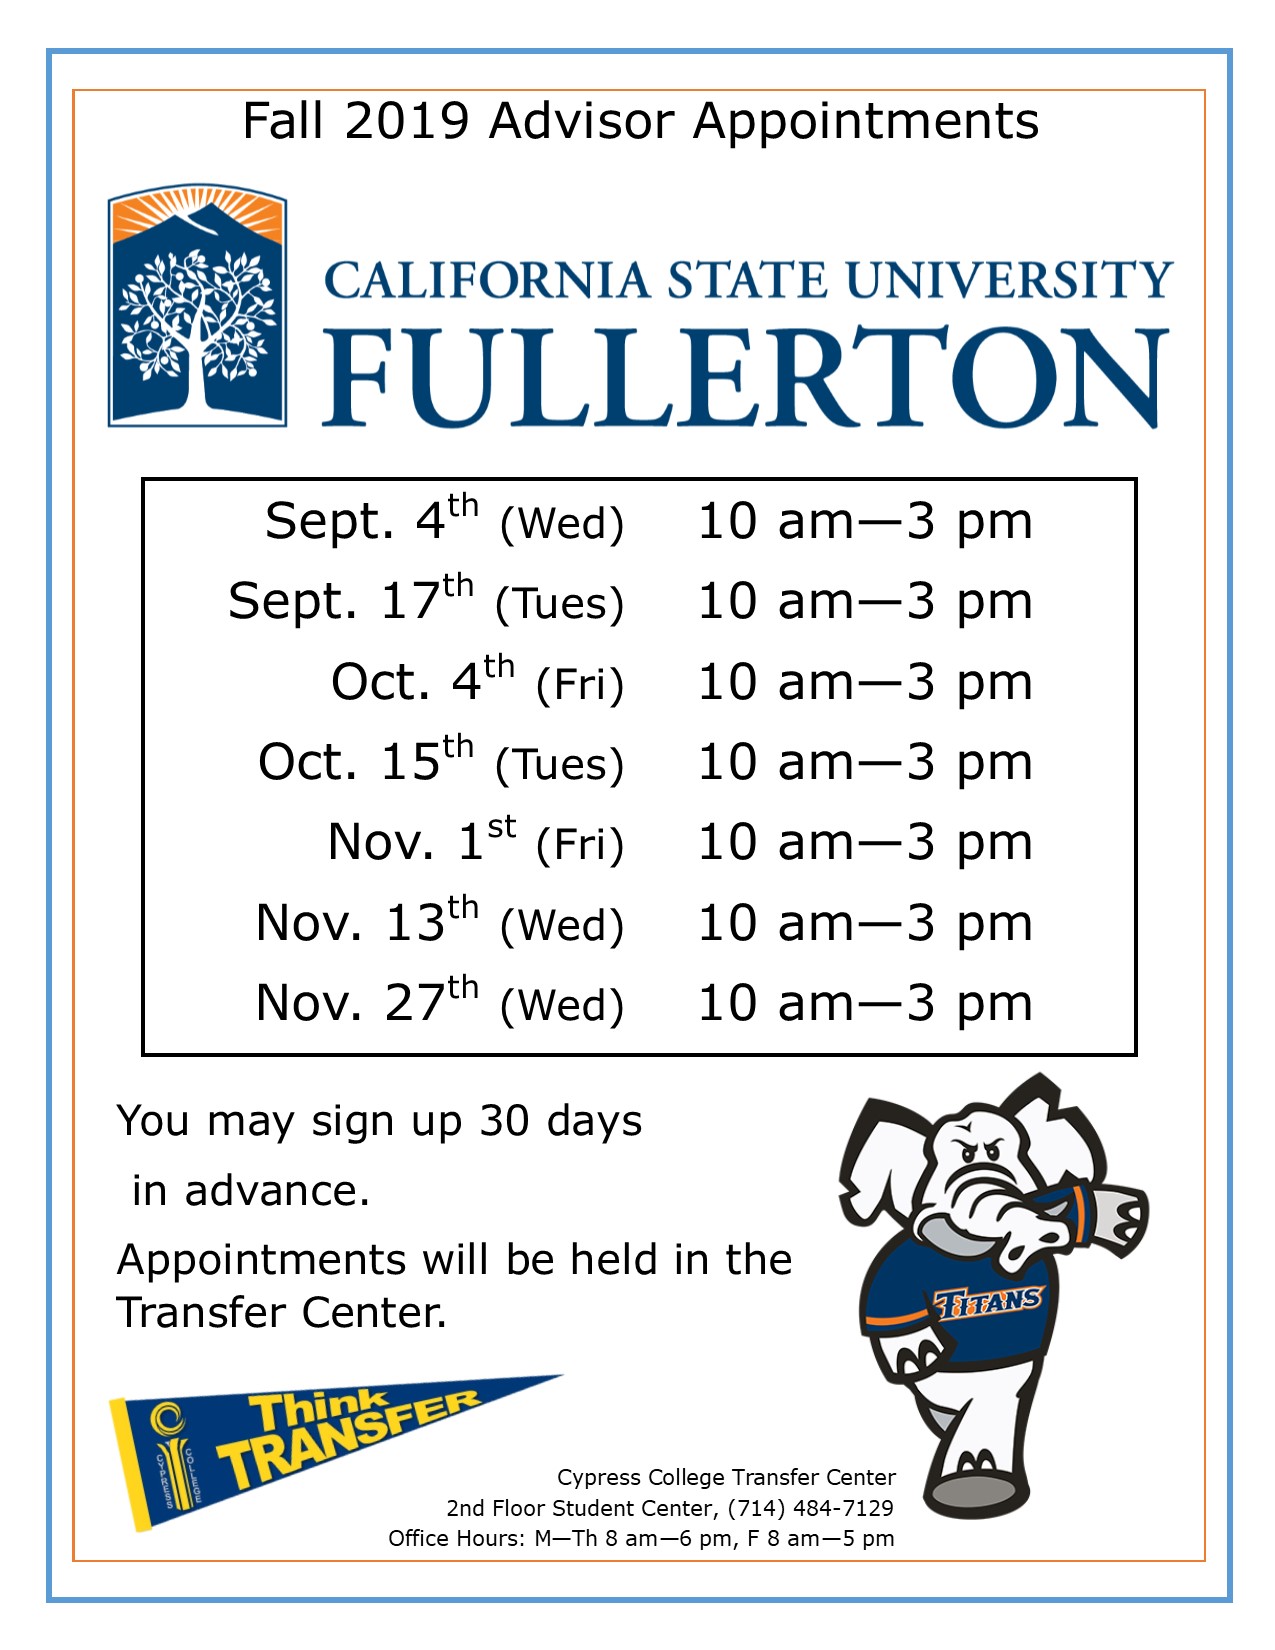 2019 CSU Fullerton advisor appointments dates and times